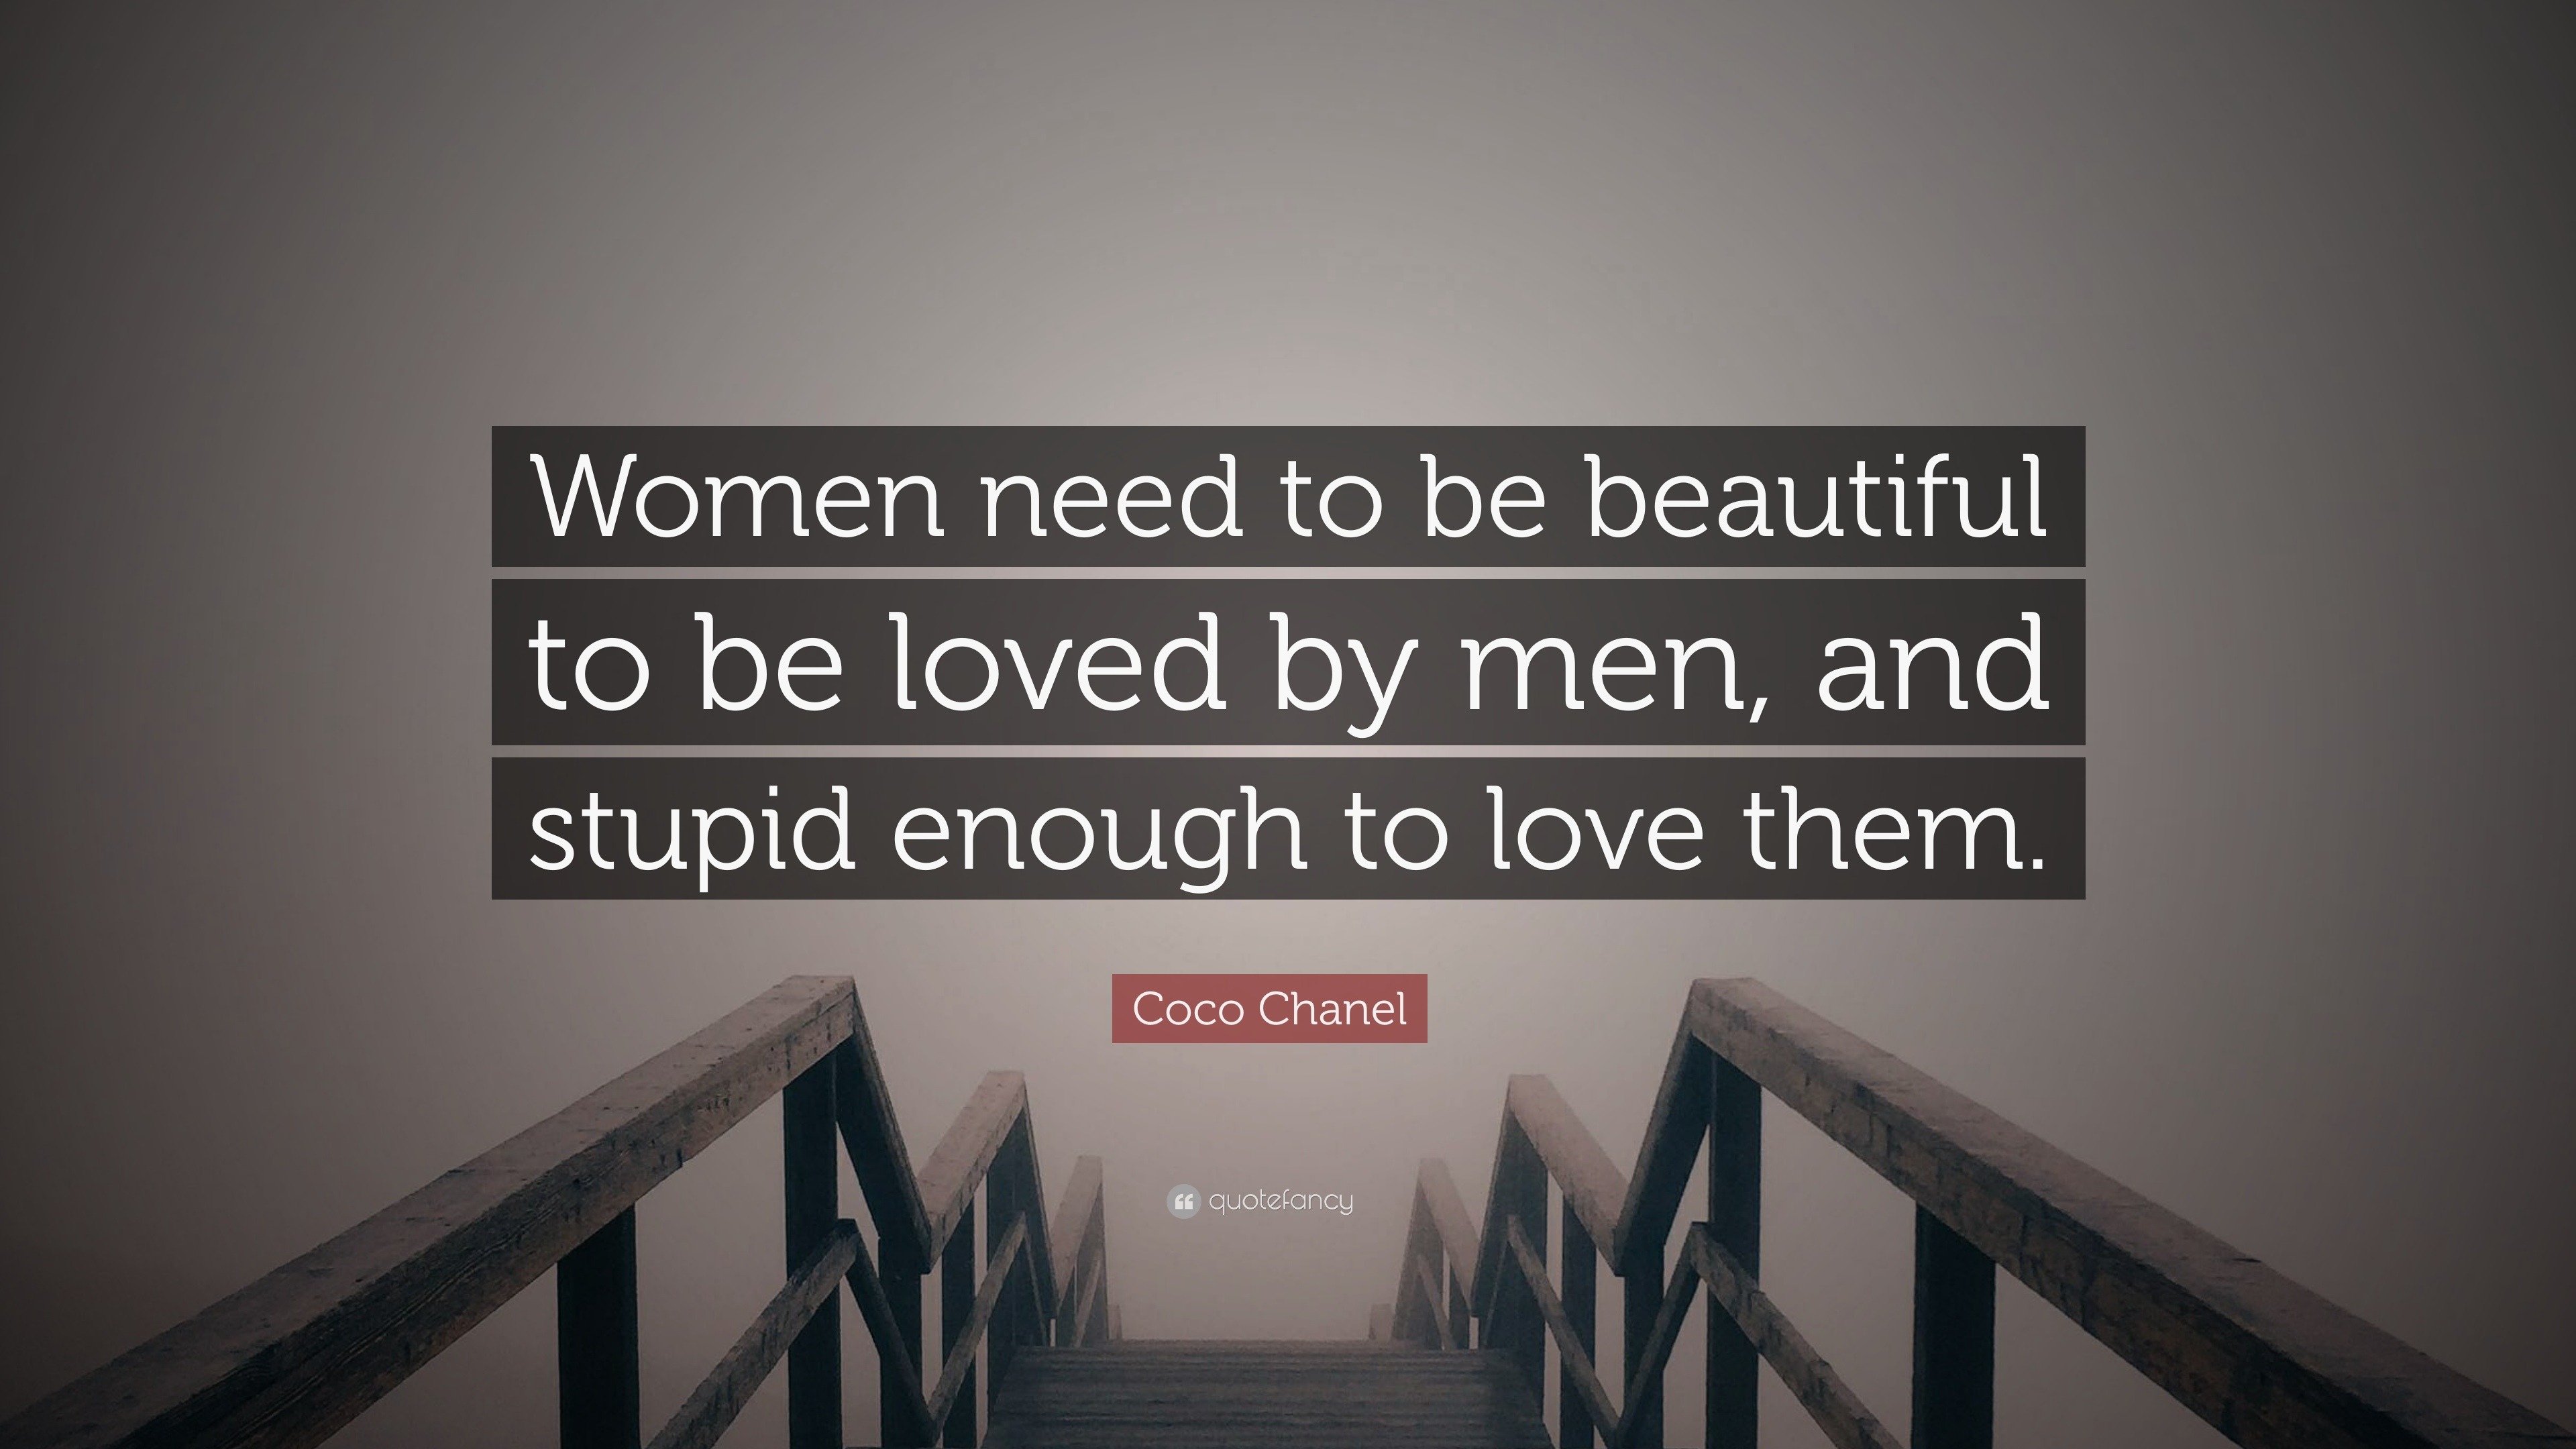 Coco Chanel Quote: “Women need to be beautiful to be loved by men, and  stupid enough